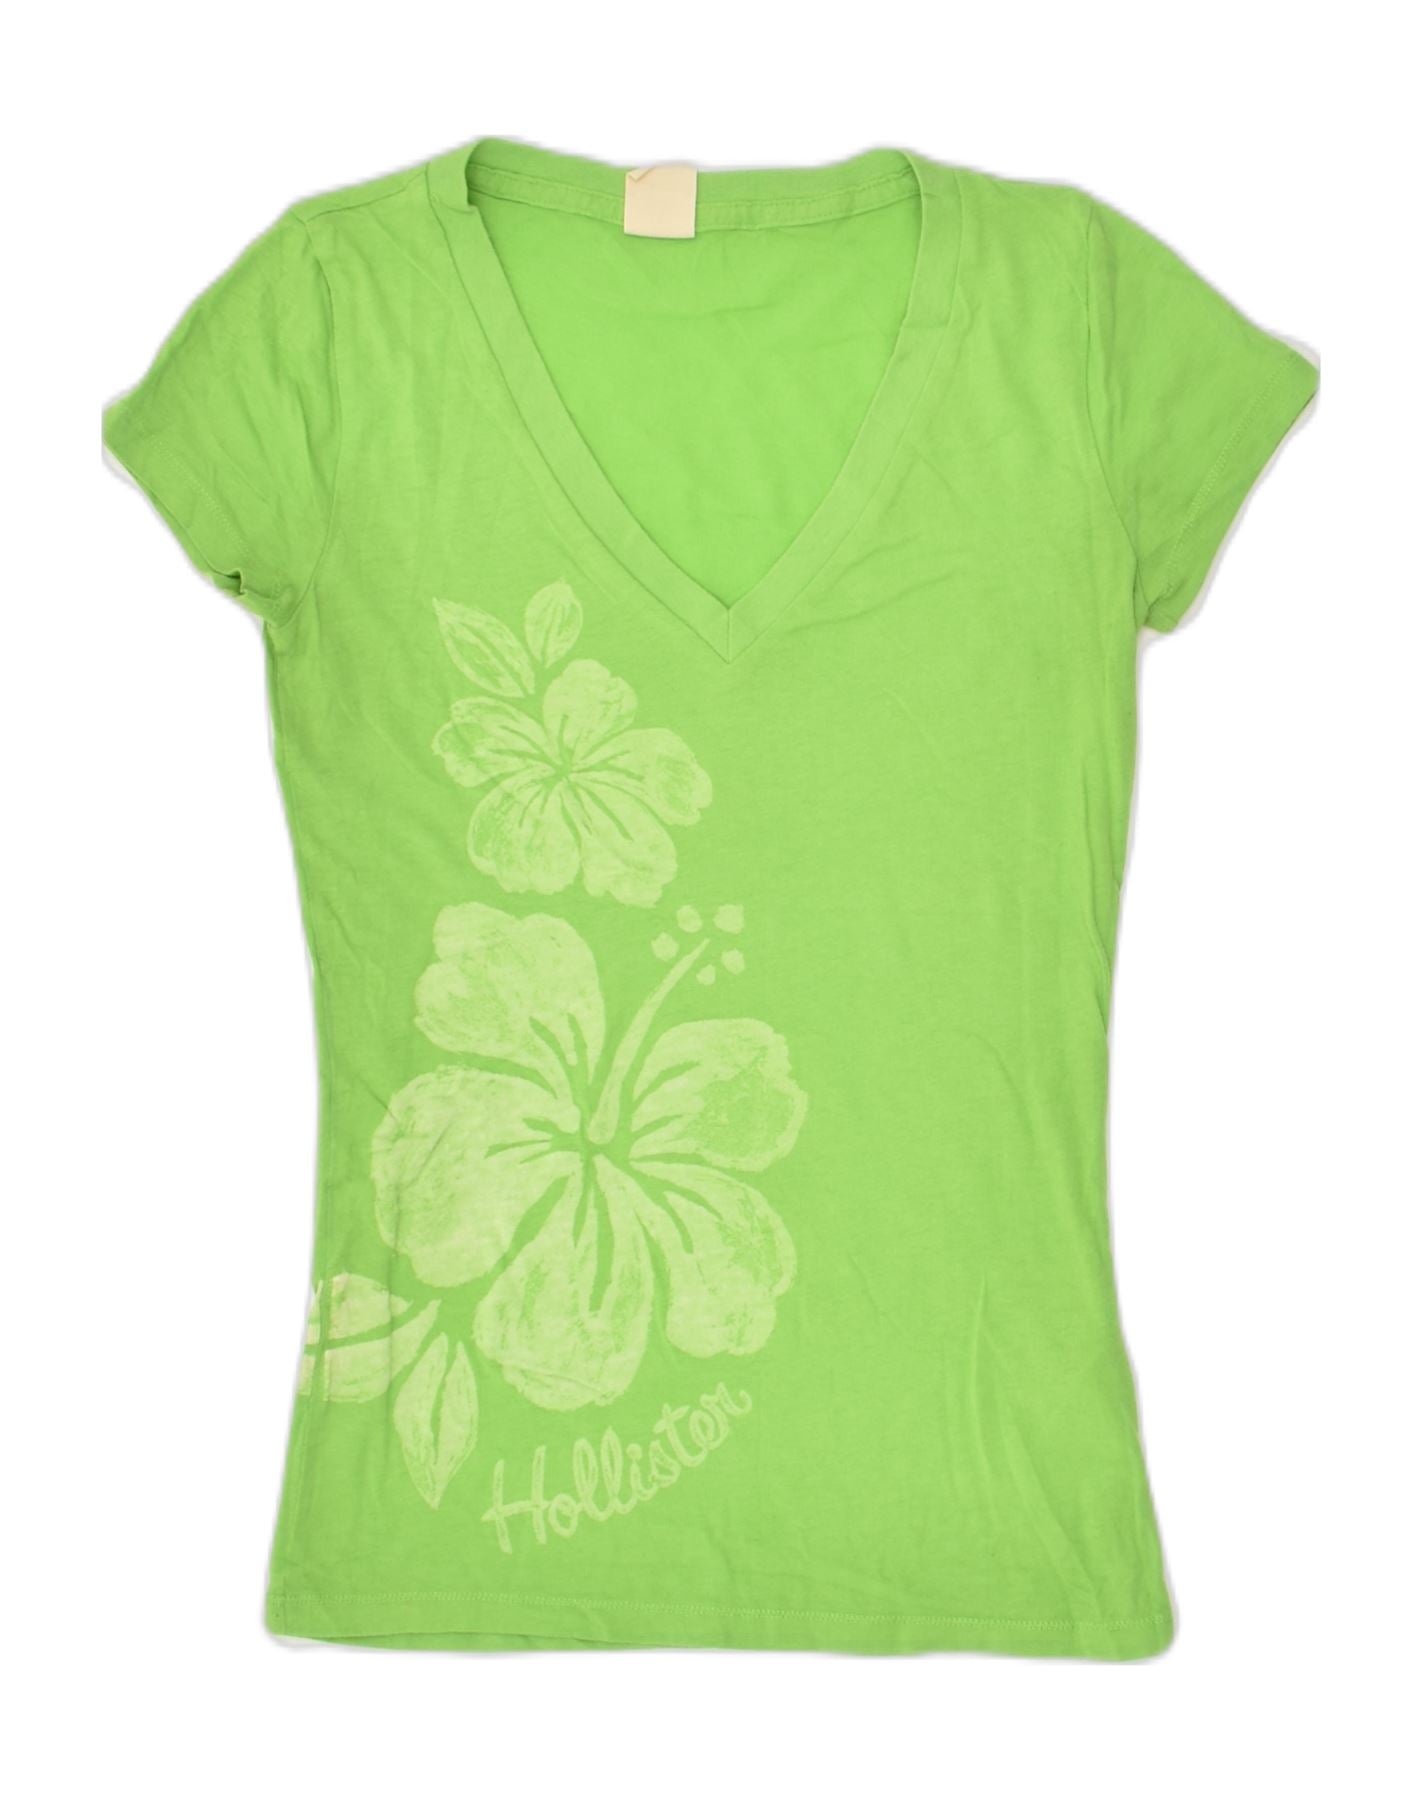 Hollister graphic tee in green